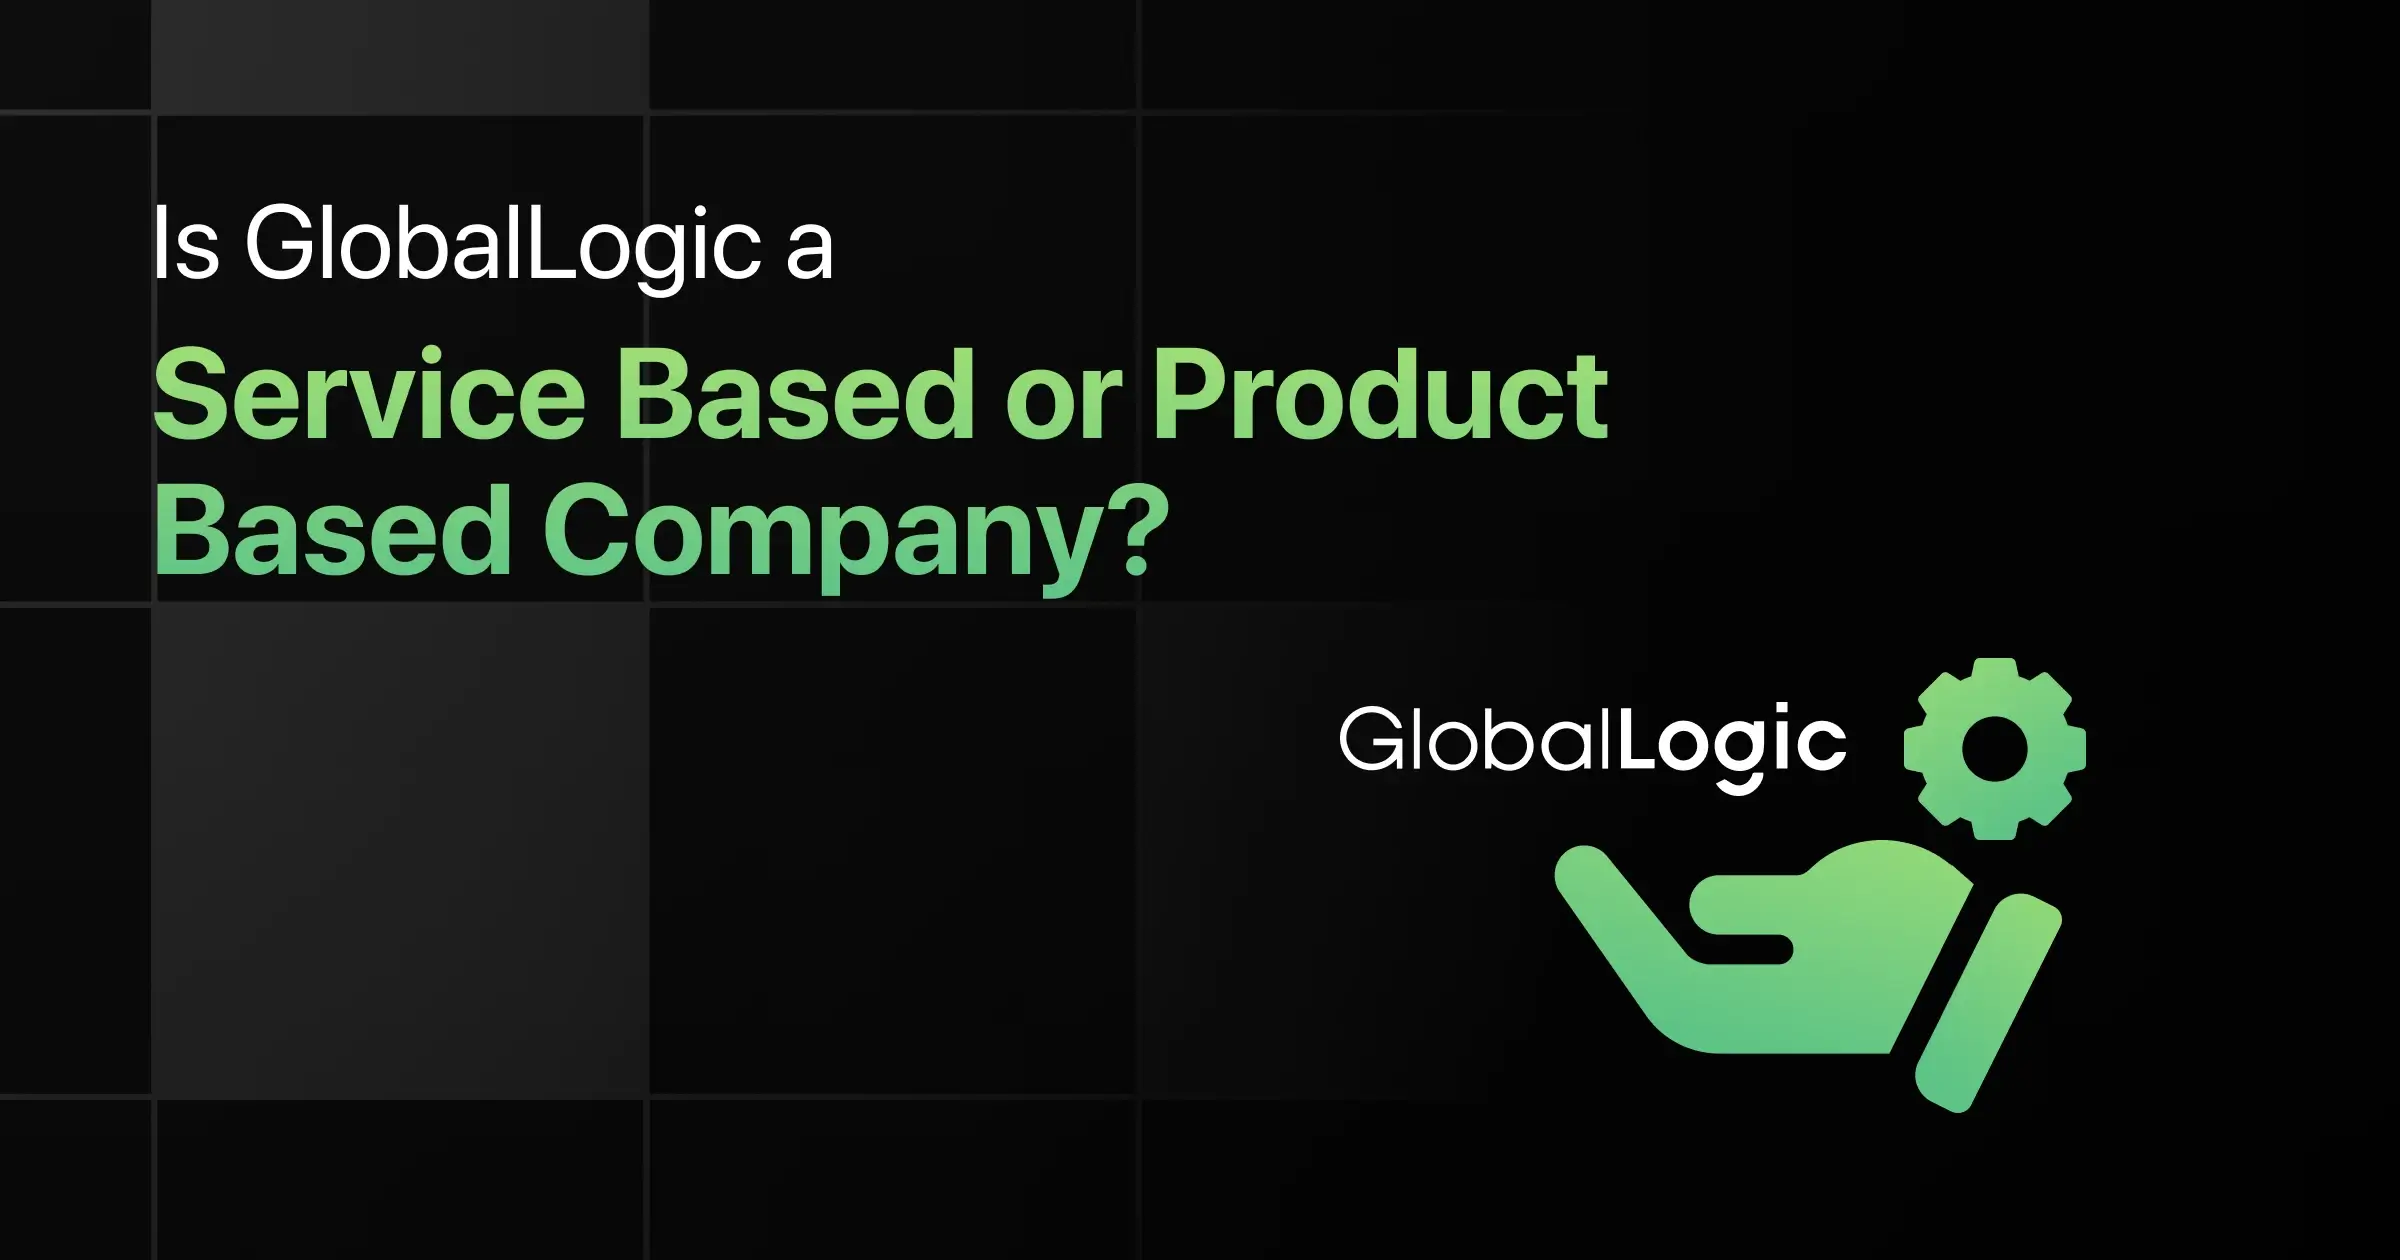 Is GlobalLogic a Service Based or Product Based Company?